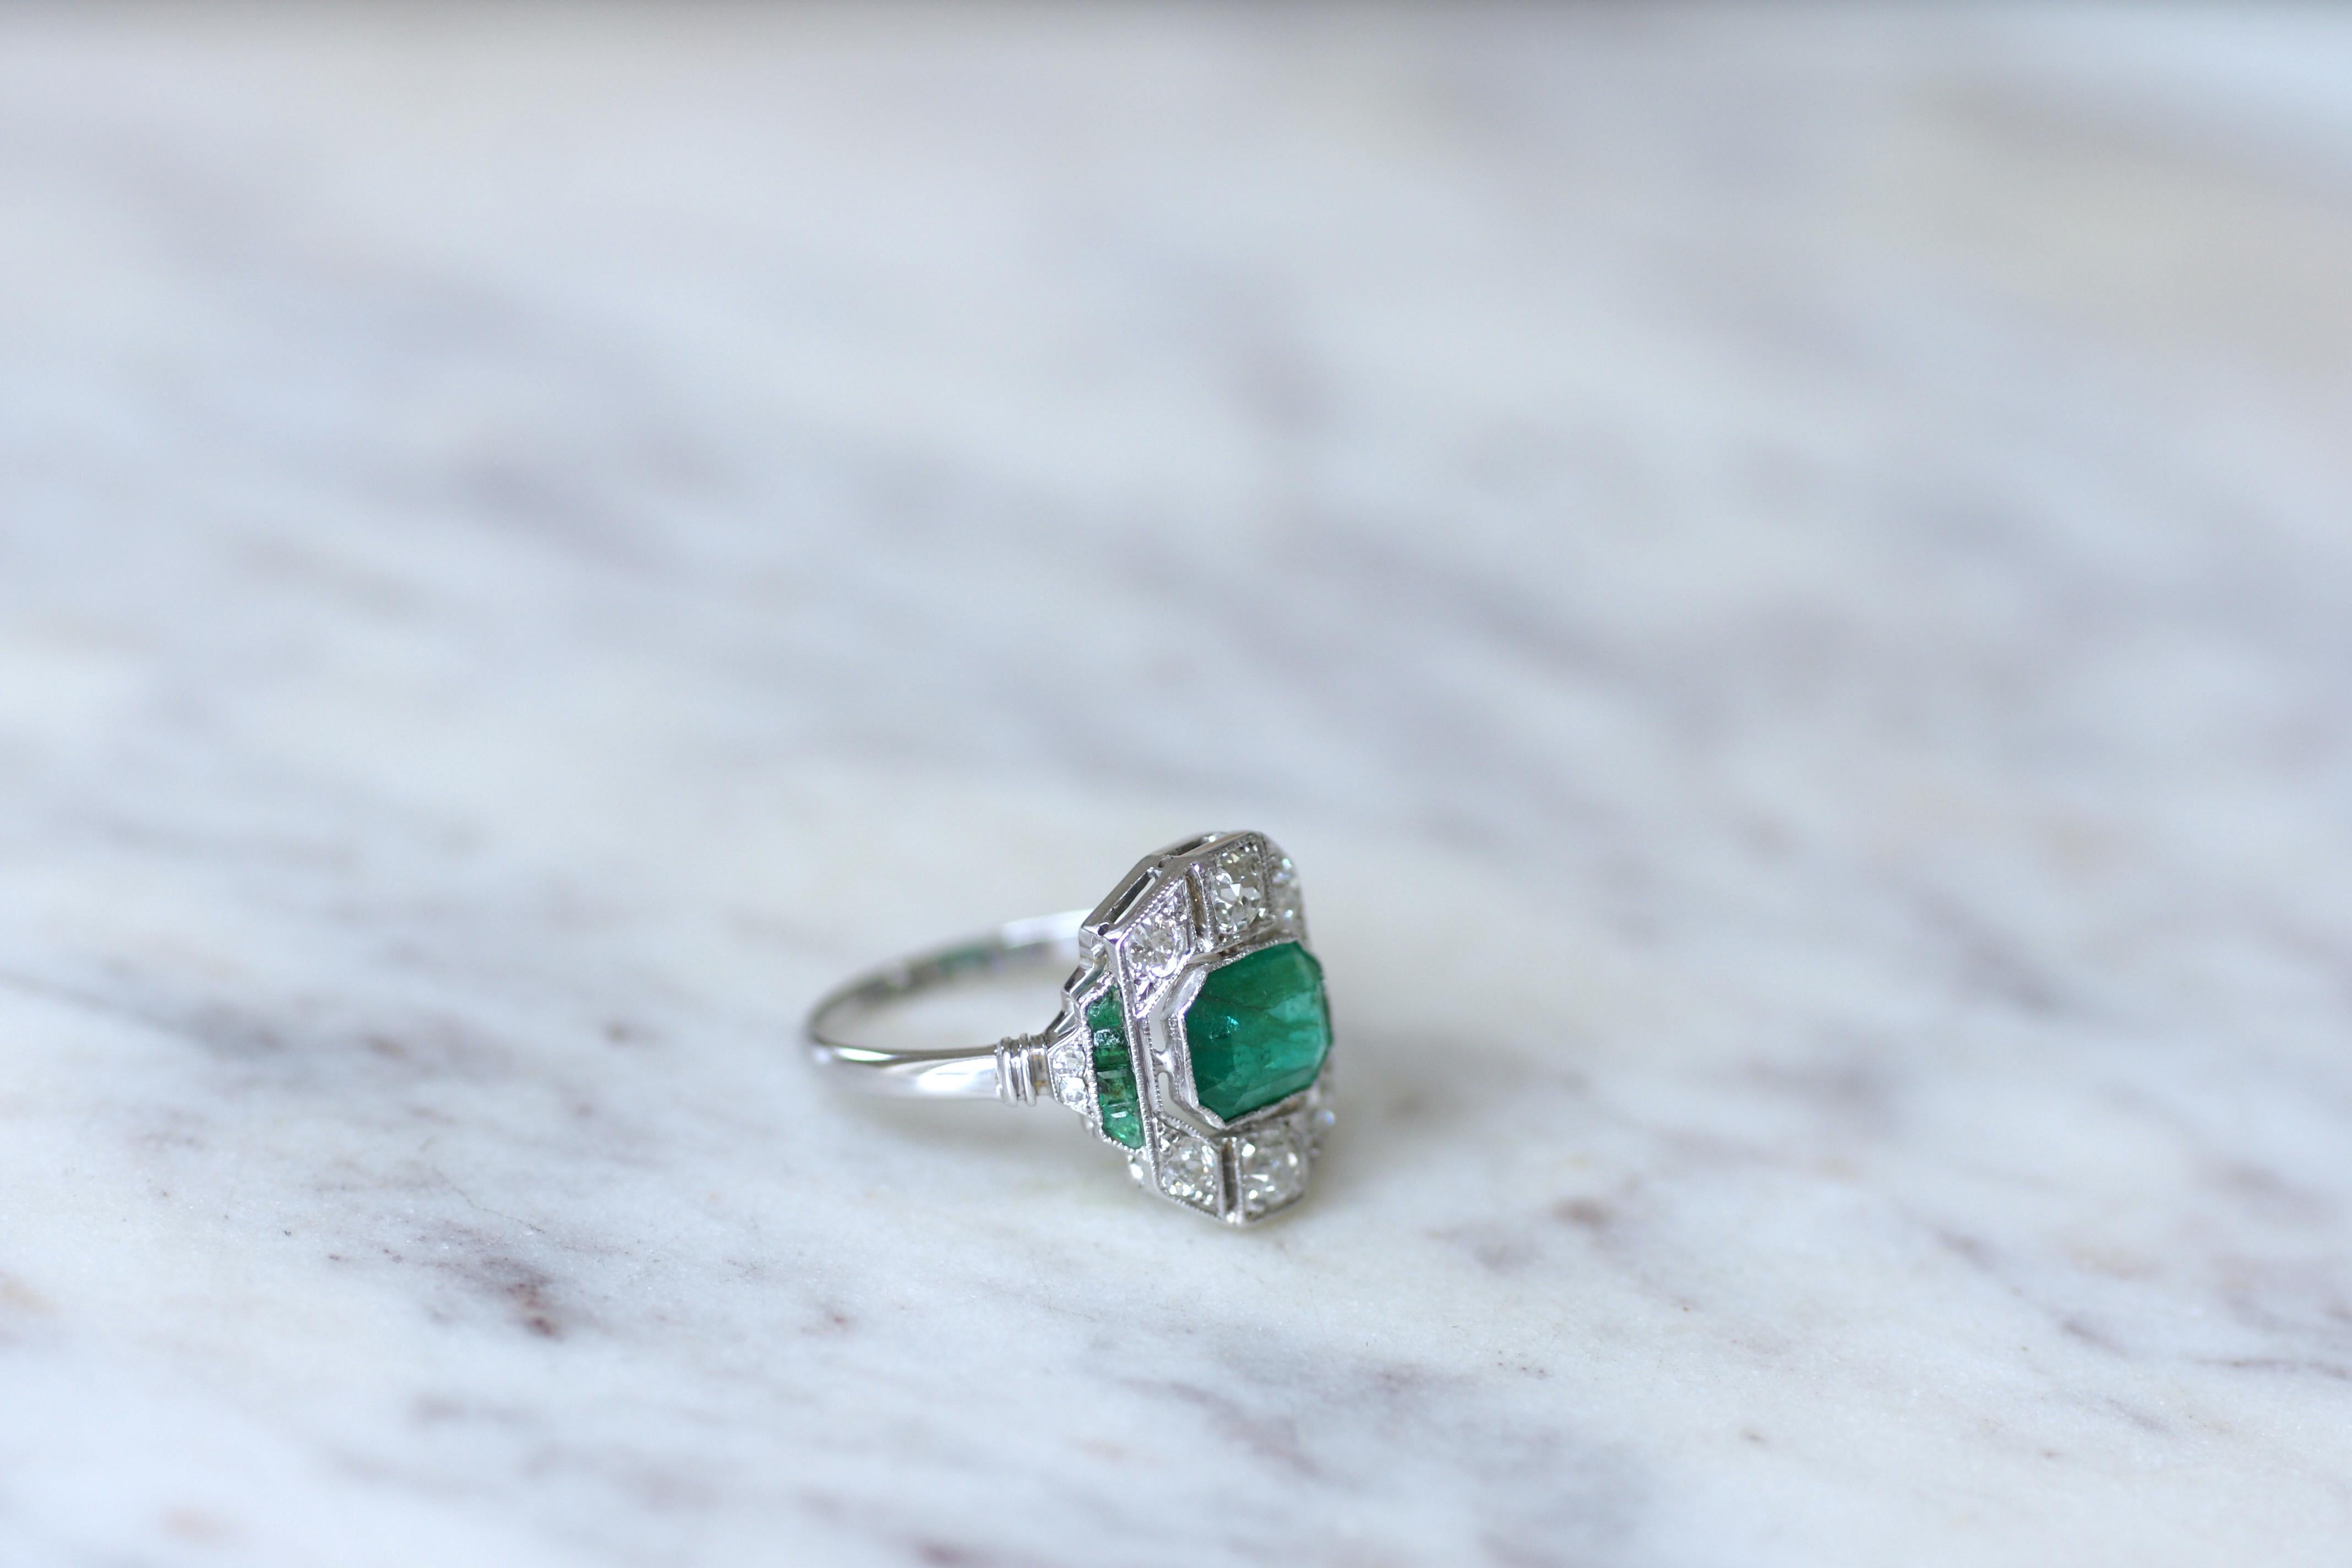 French Art Deco Certified 1, 30 Carat Emerald Ring on White Gold with Diamonds For Sale 4